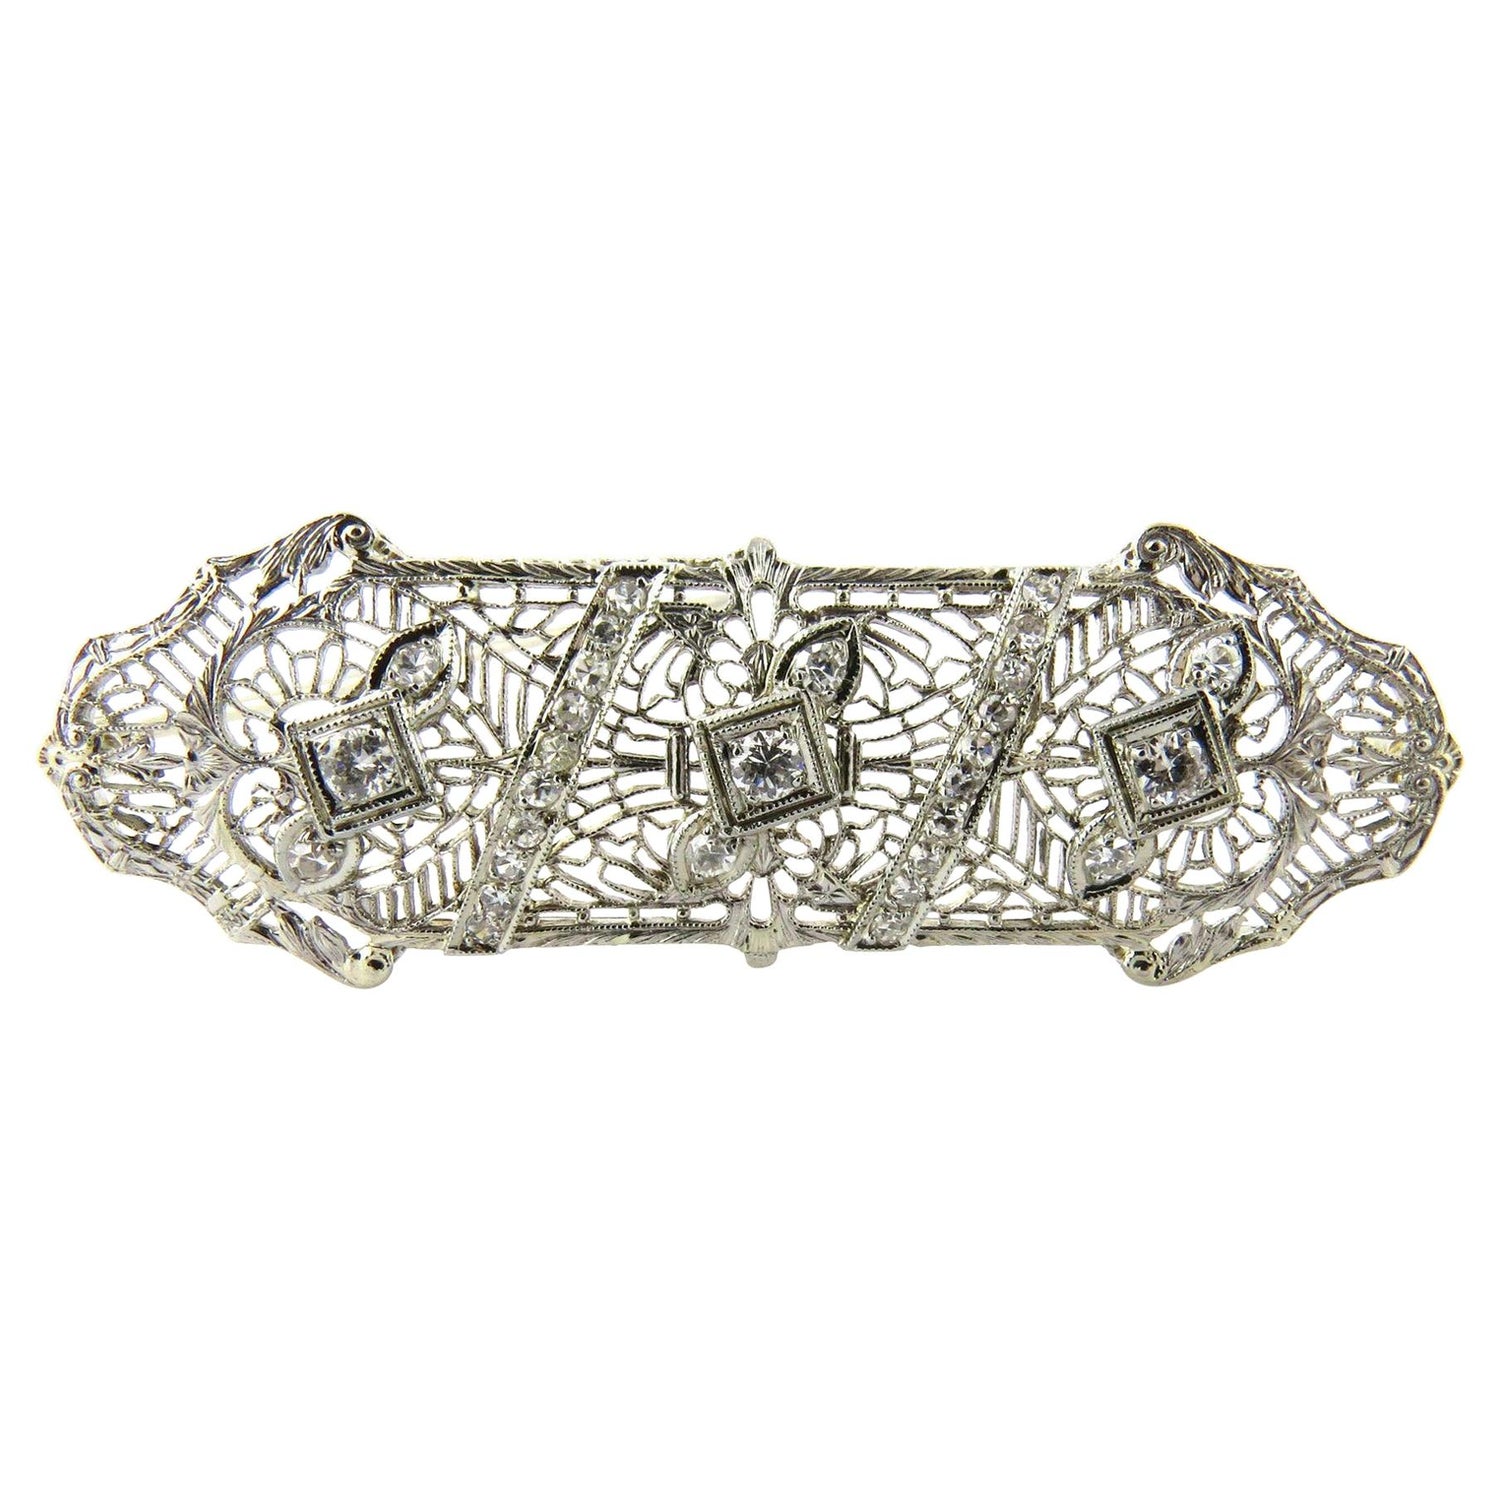 1920s Vintage Filigree 14K White Gold Diamond Pin Brooch with Blue Green  Accents - Timekeepersclayton